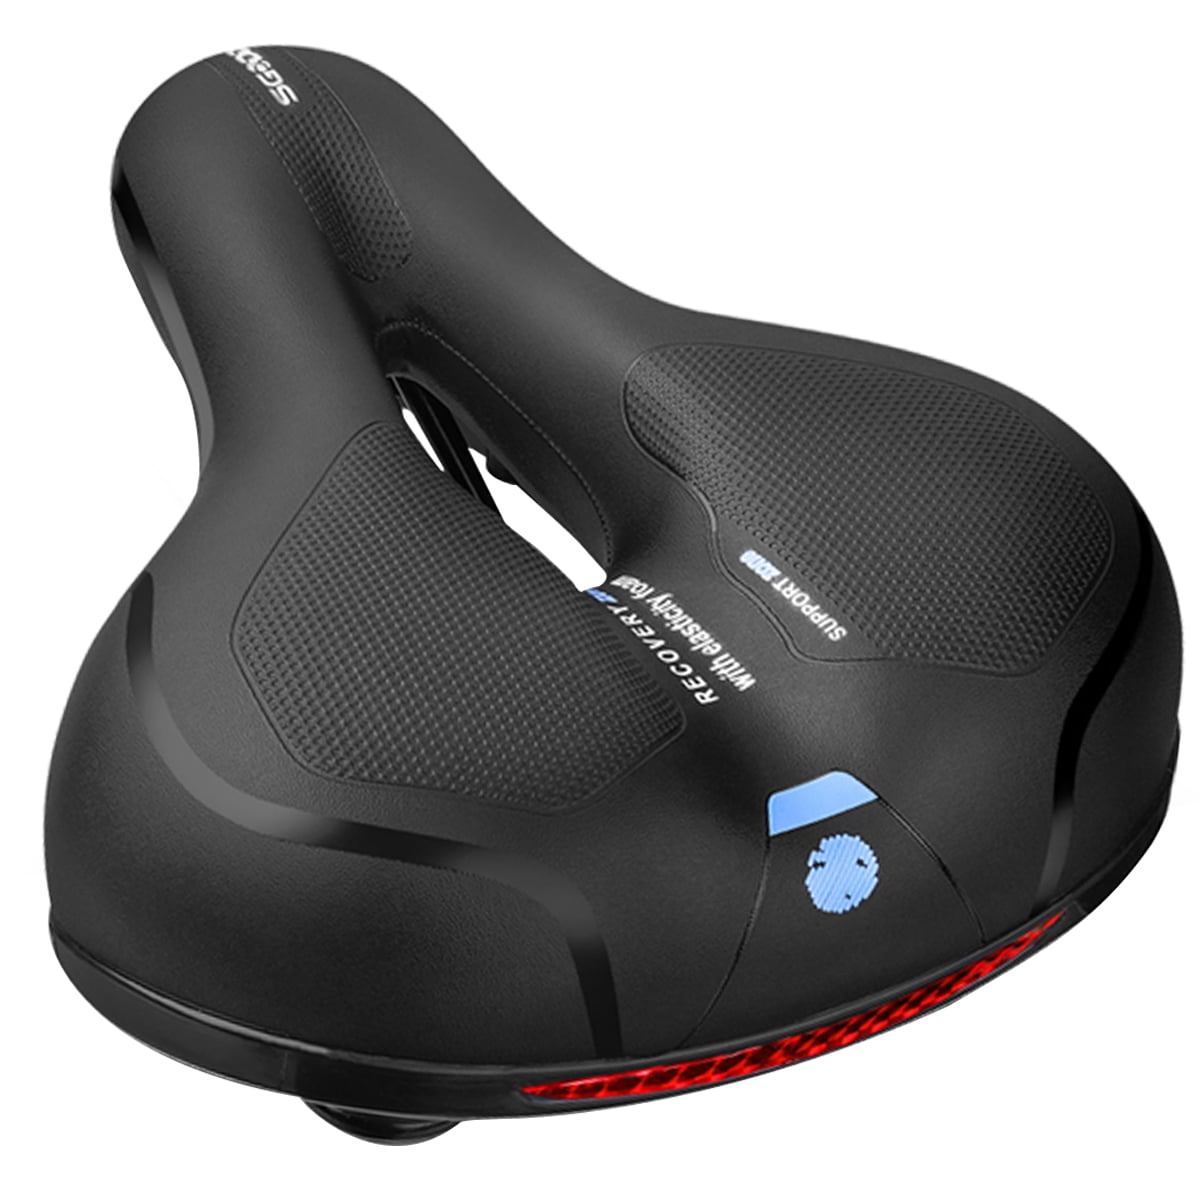 Details about   Comfort Soft Cruiser Bike Padded Saddle Bicycle Seat Sporty Wide Air Cushion Pad 